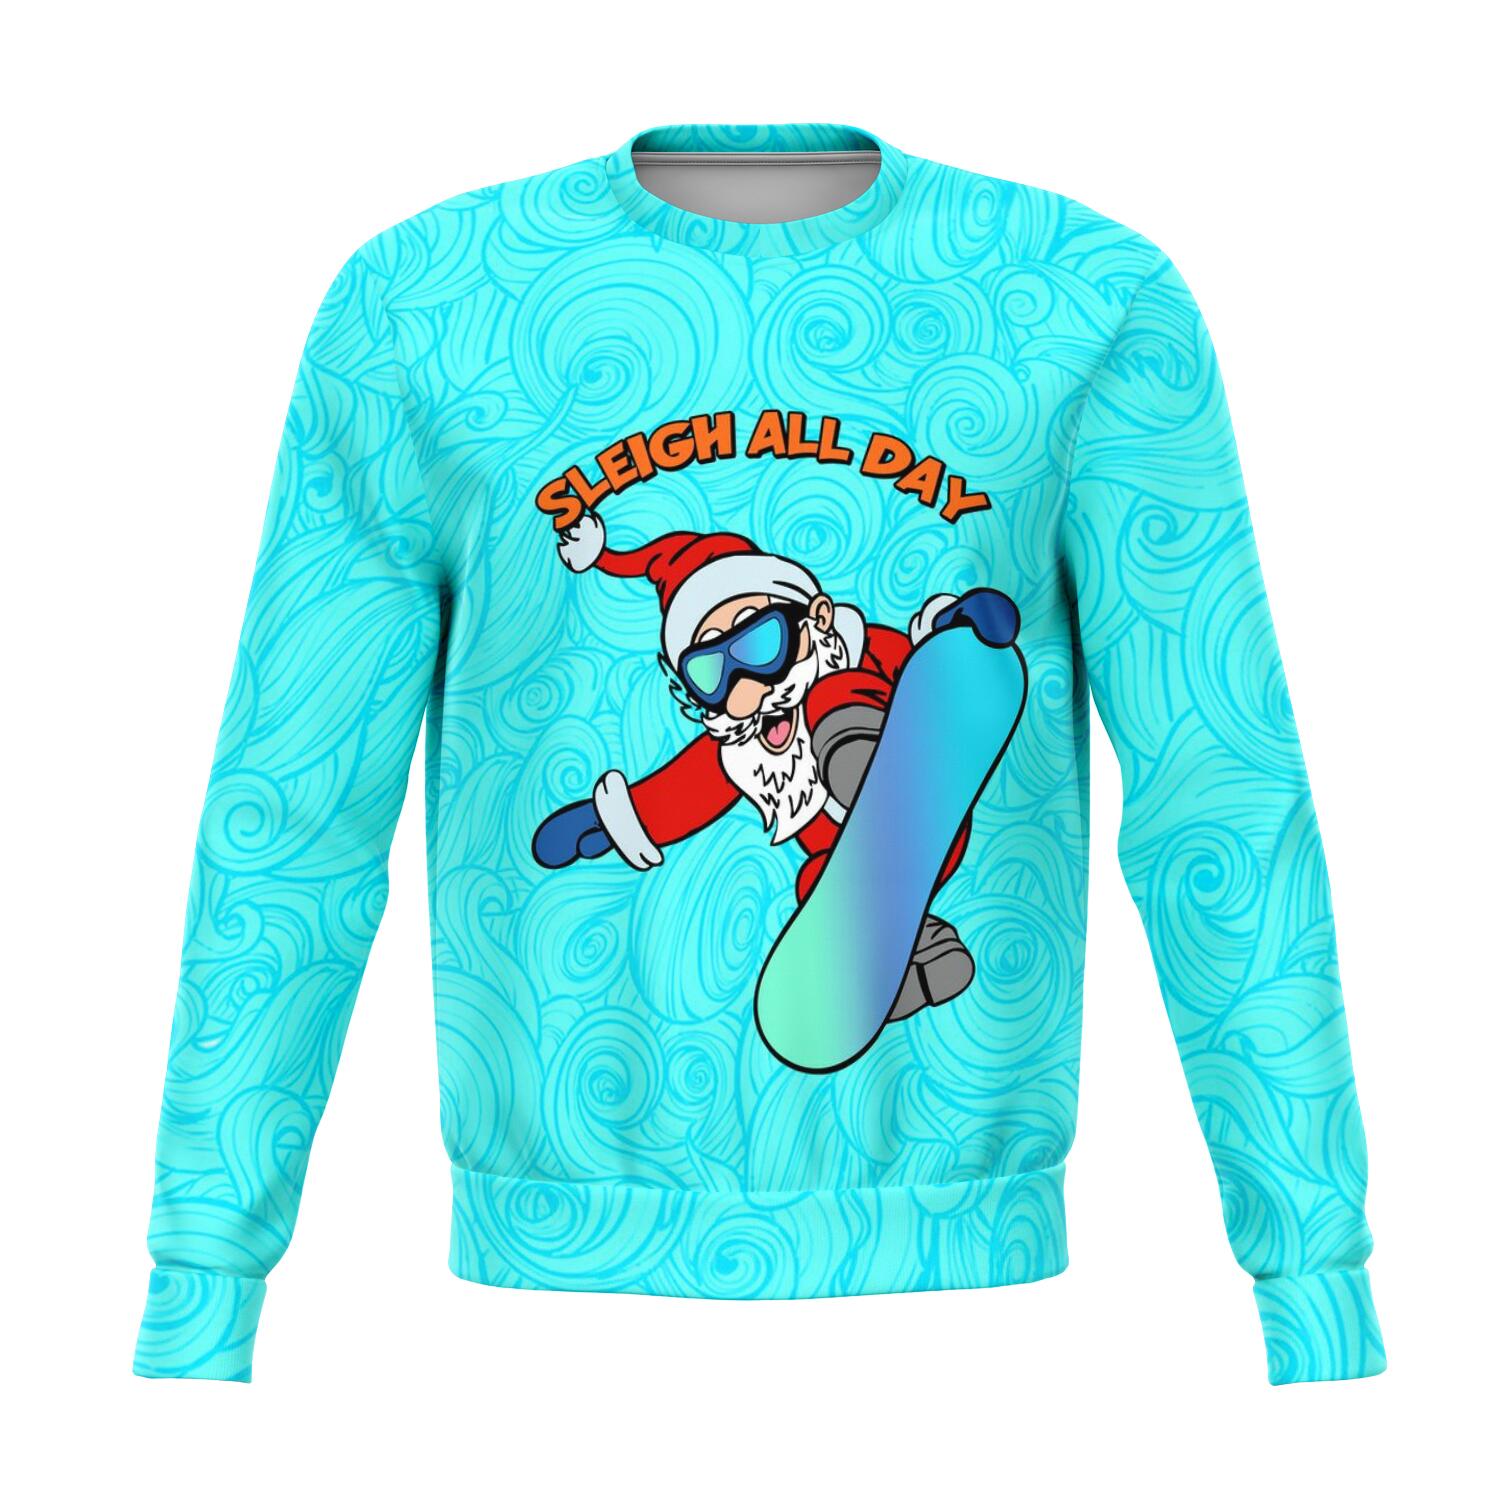 Sleigh All Day Snowboarding Ugly Christmas Sweater Order By December 5 - Powderaddicts